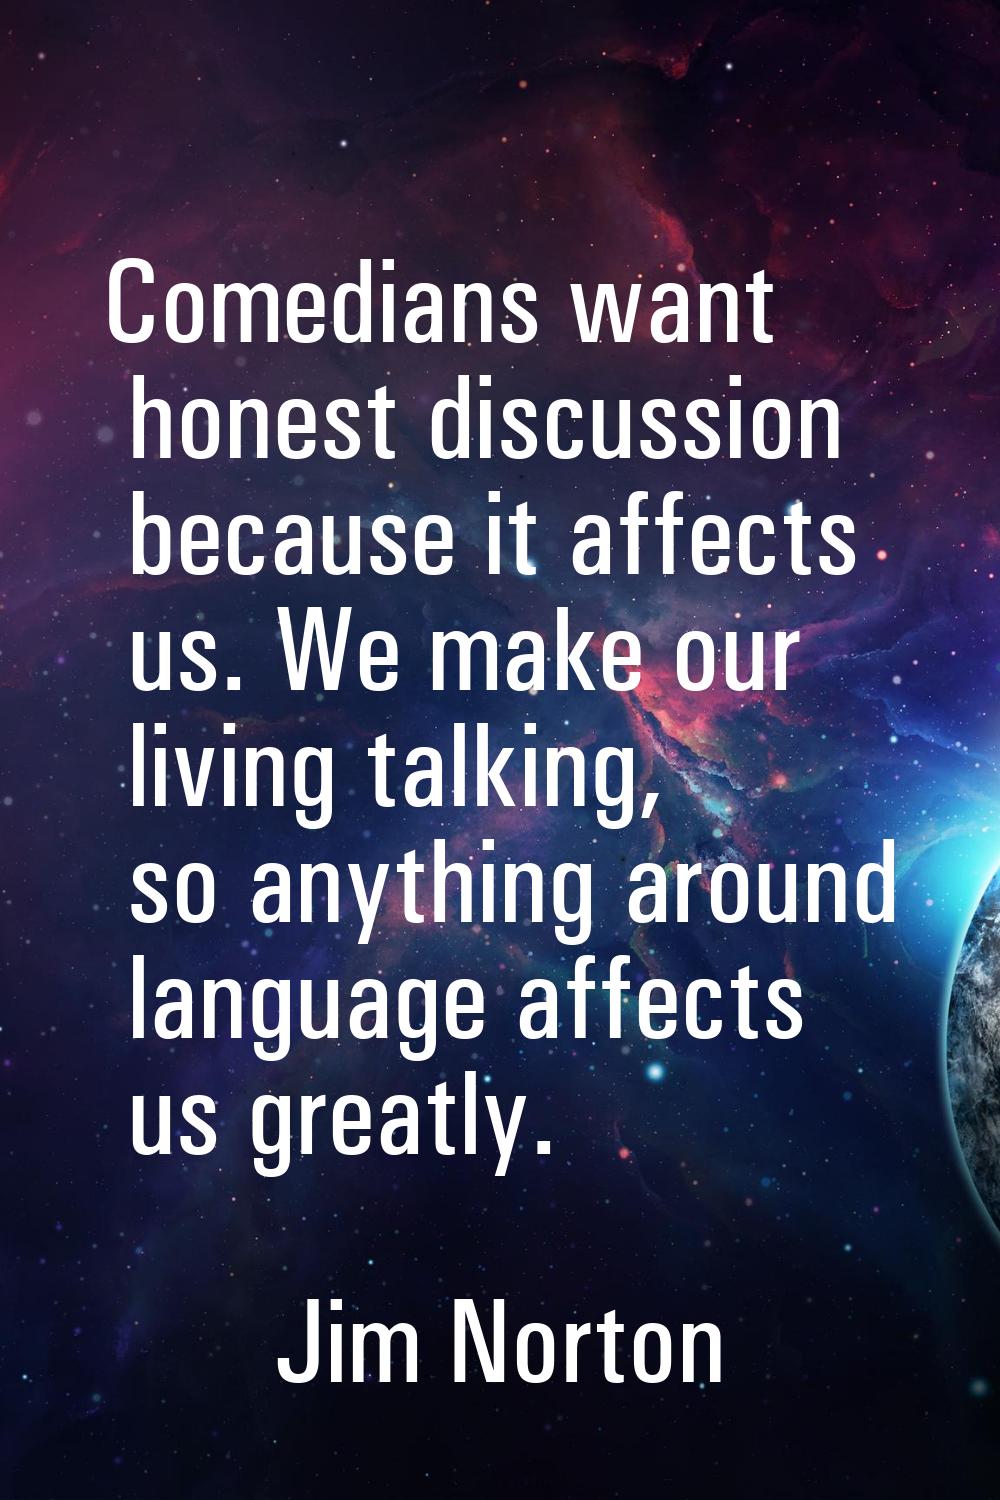 Comedians want honest discussion because it affects us. We make our living talking, so anything aro